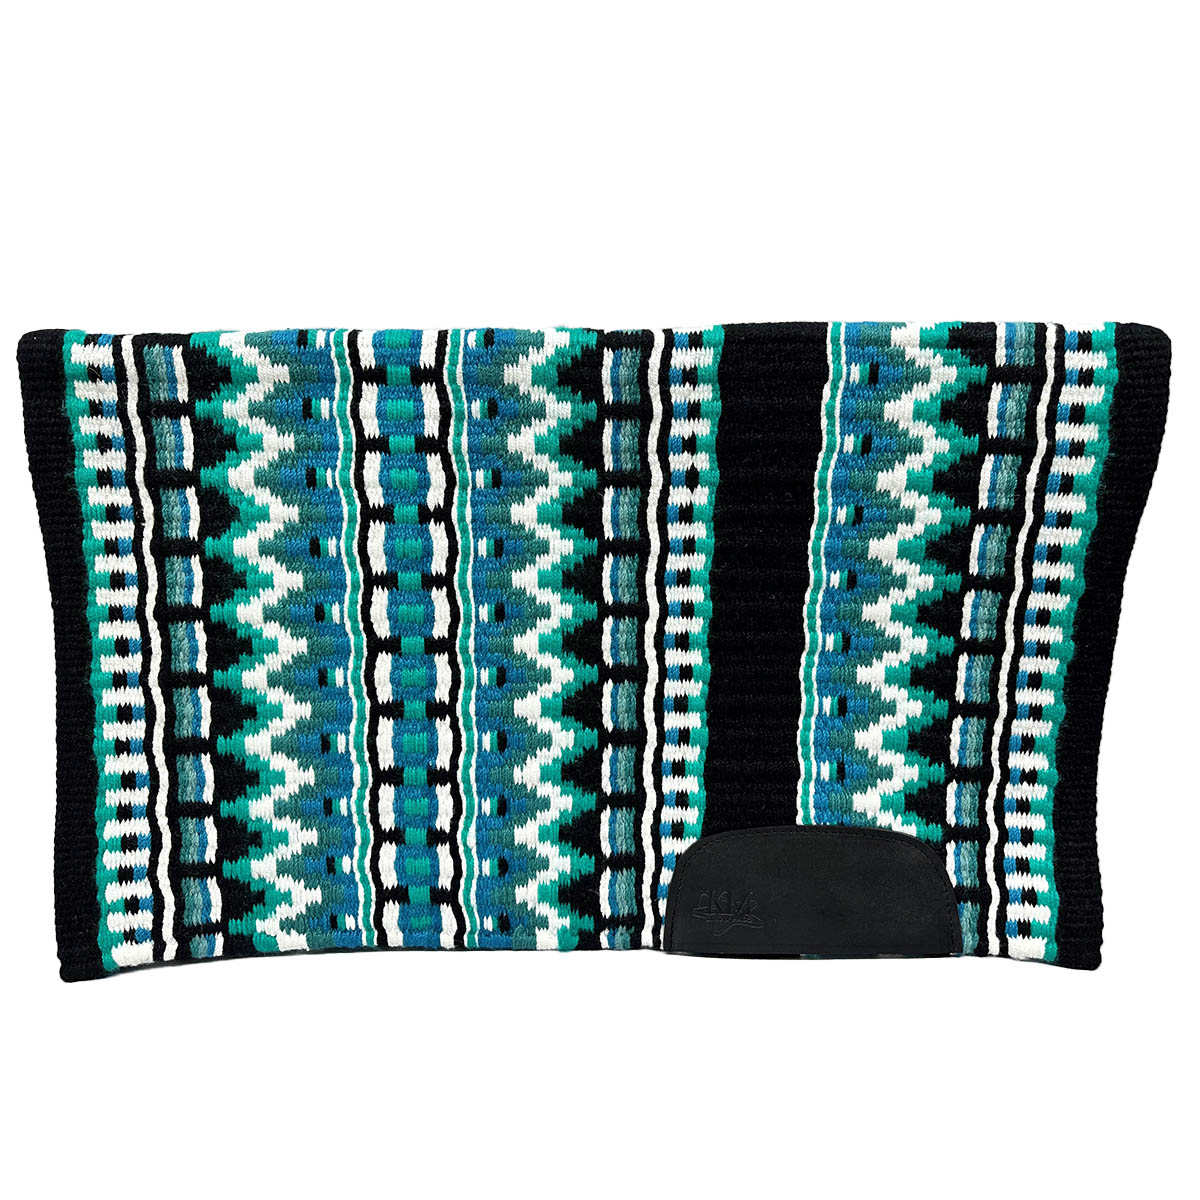 Saddle Blanket with turquoise and greens